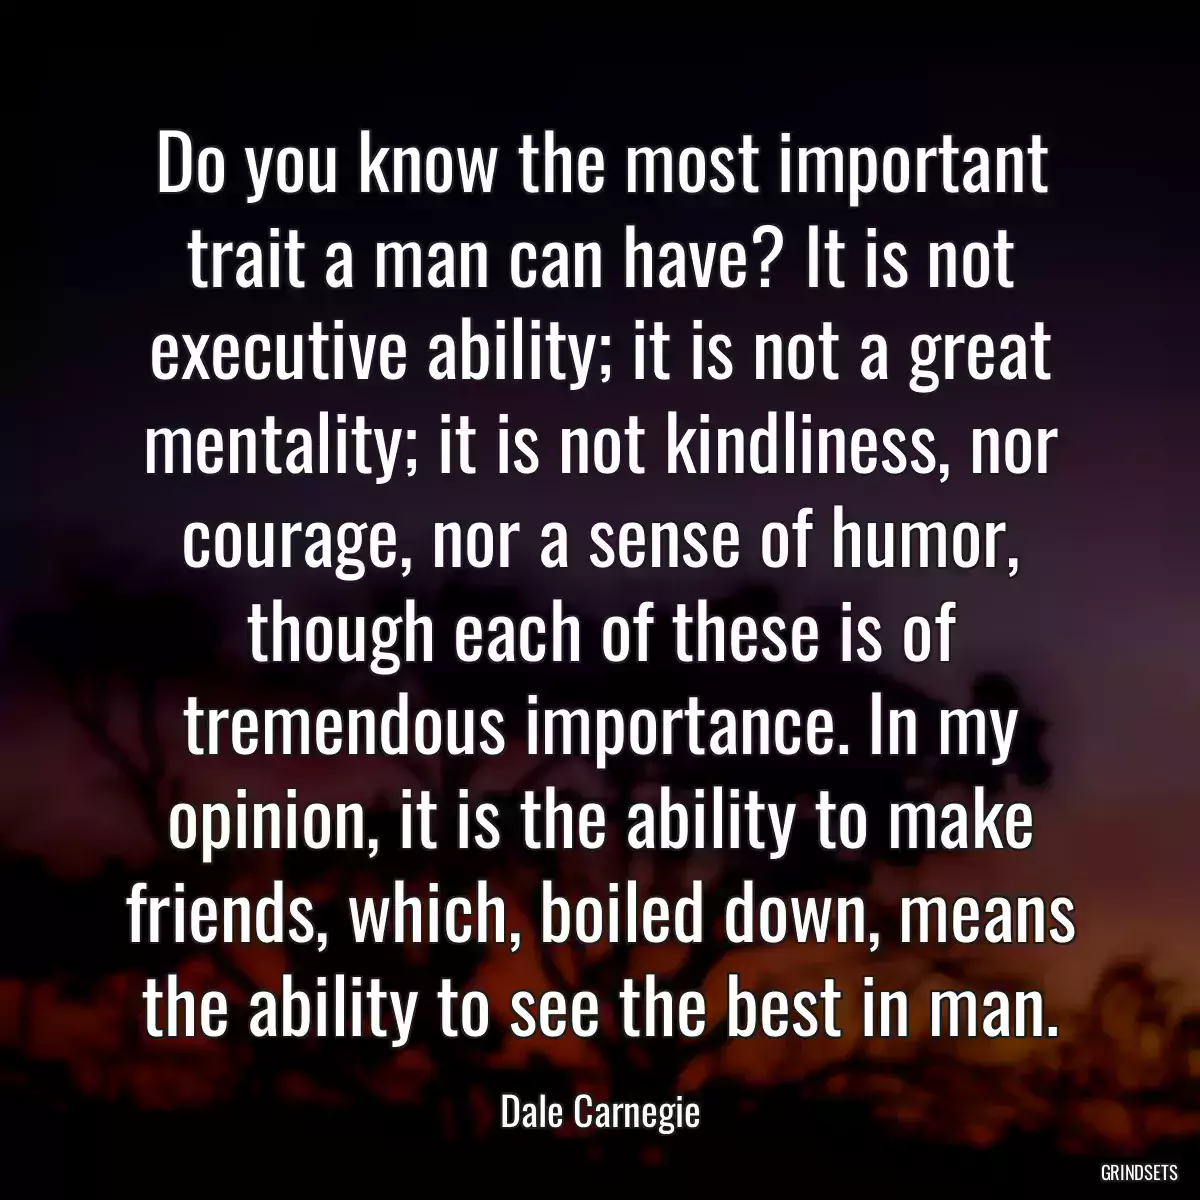 Do you know the most important trait a man can have? It is not executive ability; it is not a great mentality; it is not kindliness, nor courage, nor a sense of humor, though each of these is of tremendous importance. In my opinion, it is the ability to make friends, which, boiled down, means the ability to see the best in man.